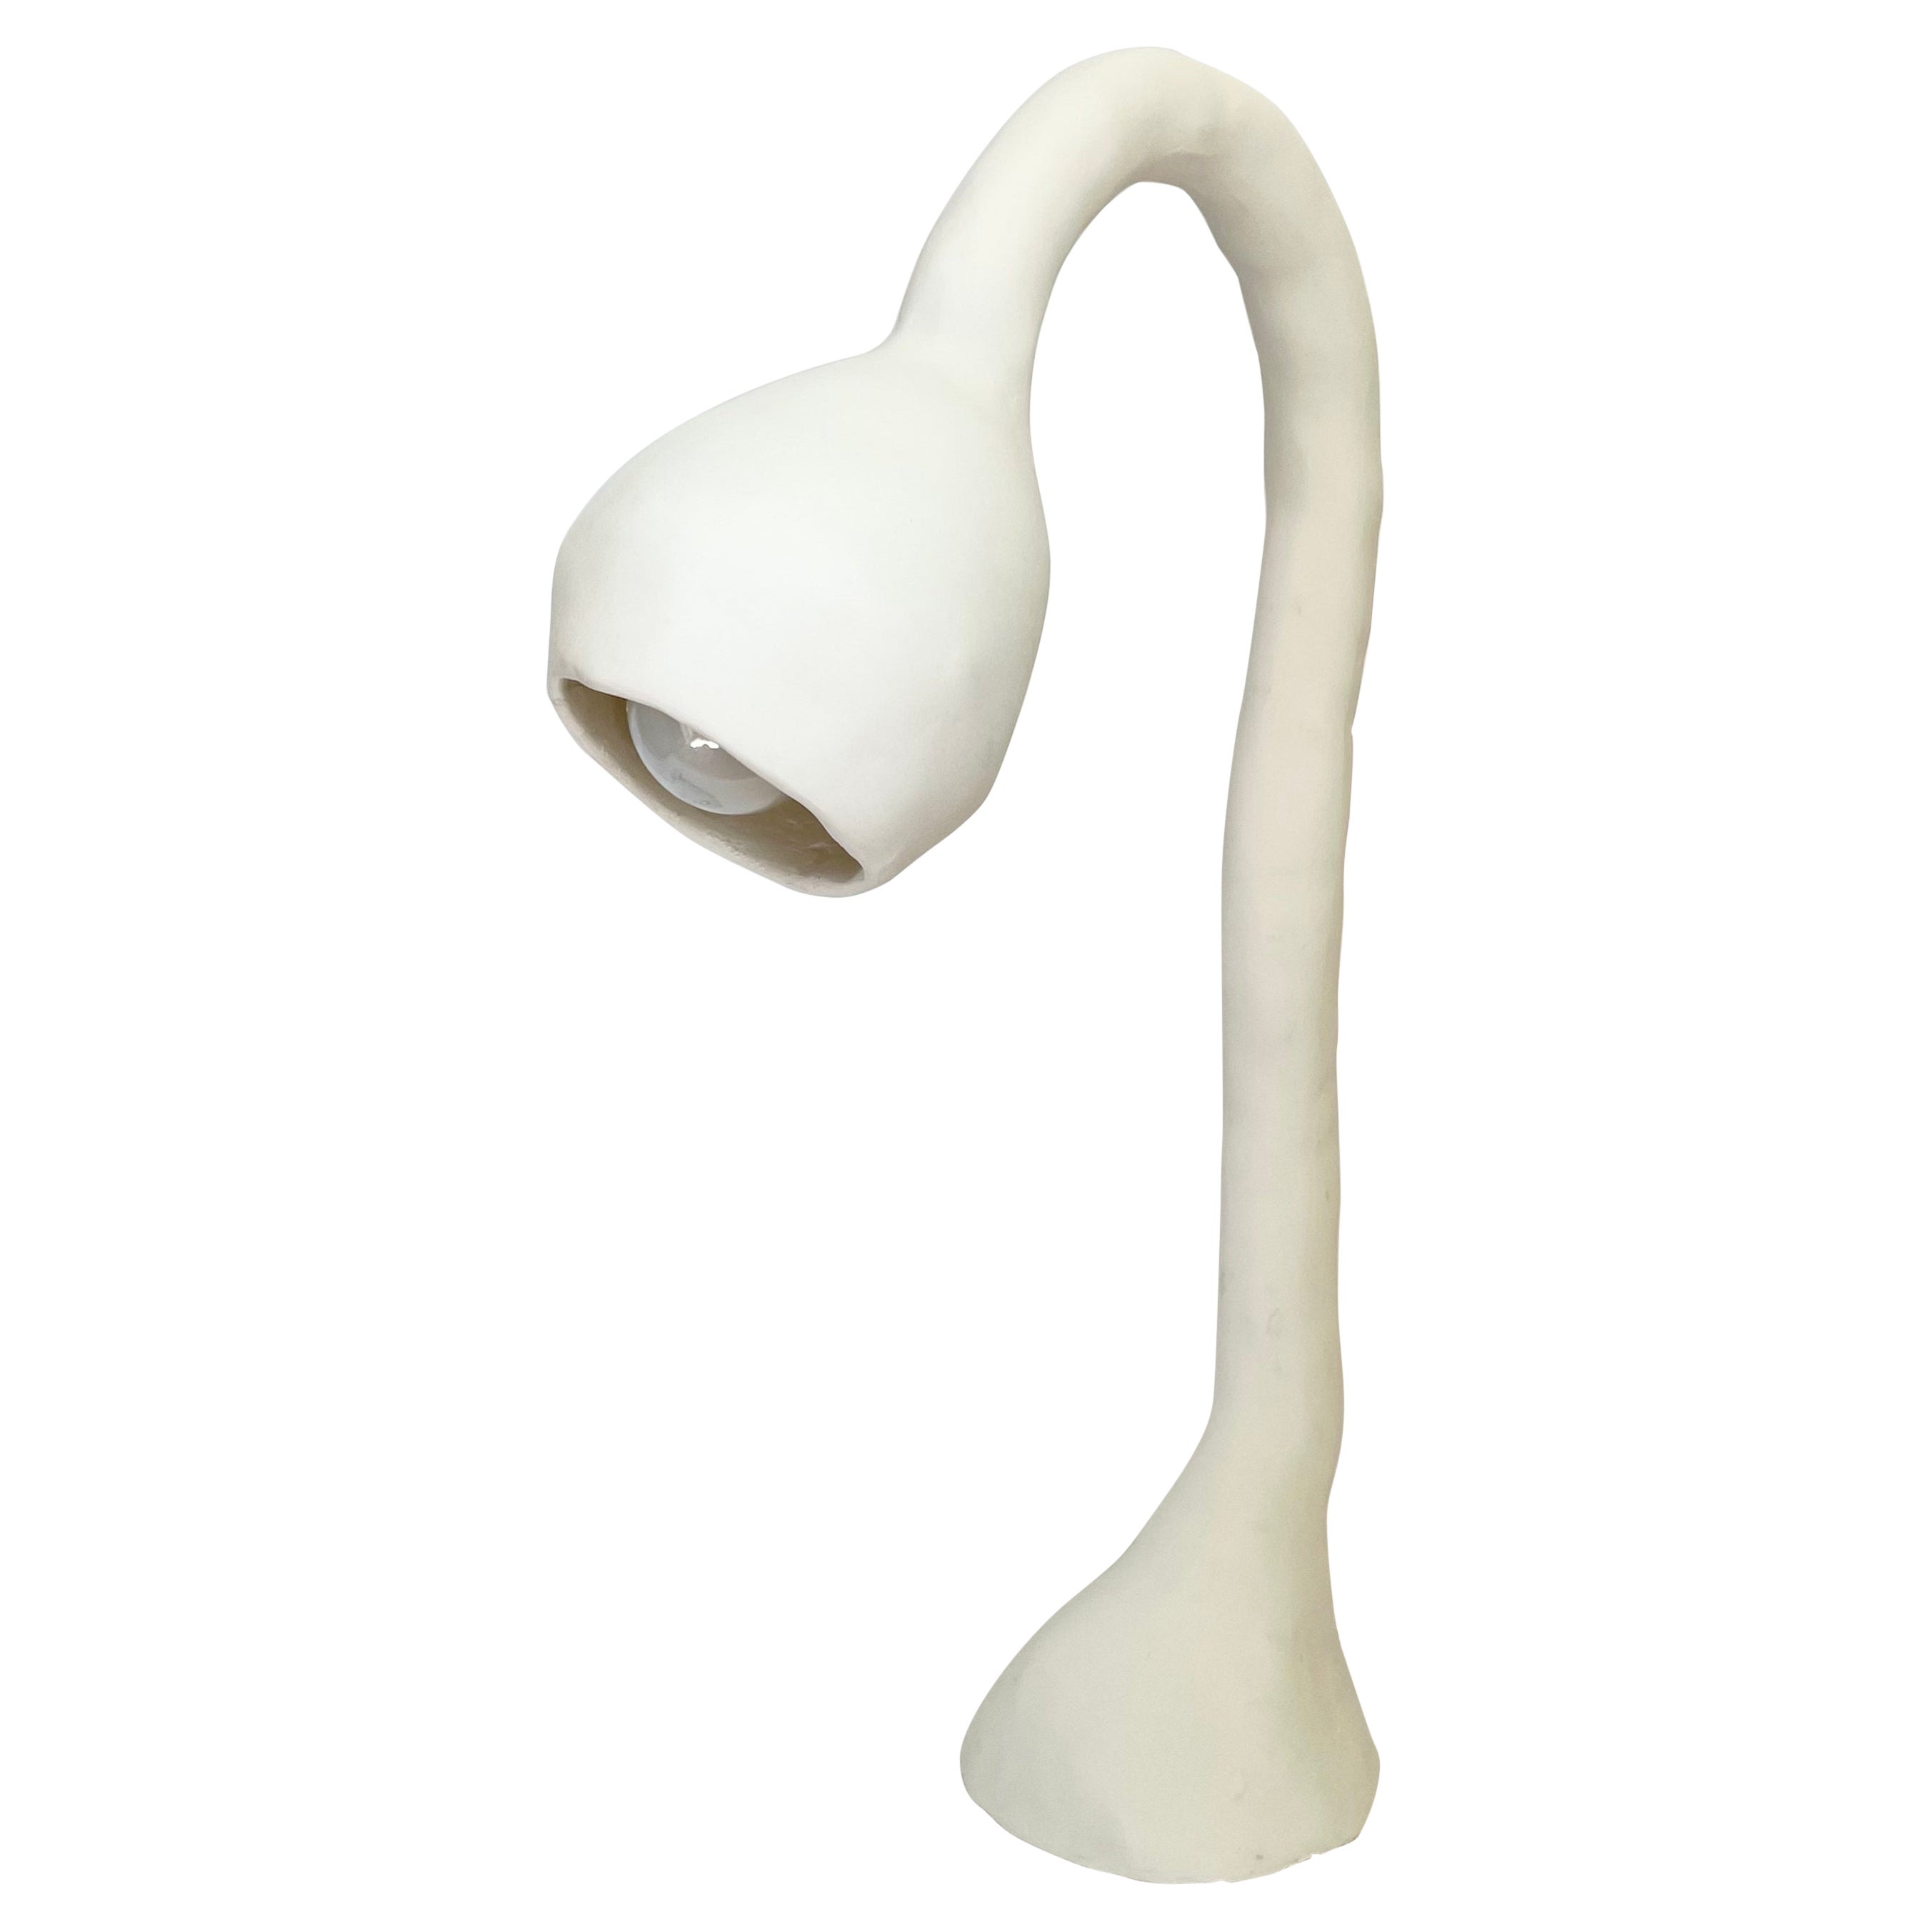 Biomorphic Line by Studio Chora, Table Lamp, White Limestone, Made-To-Order